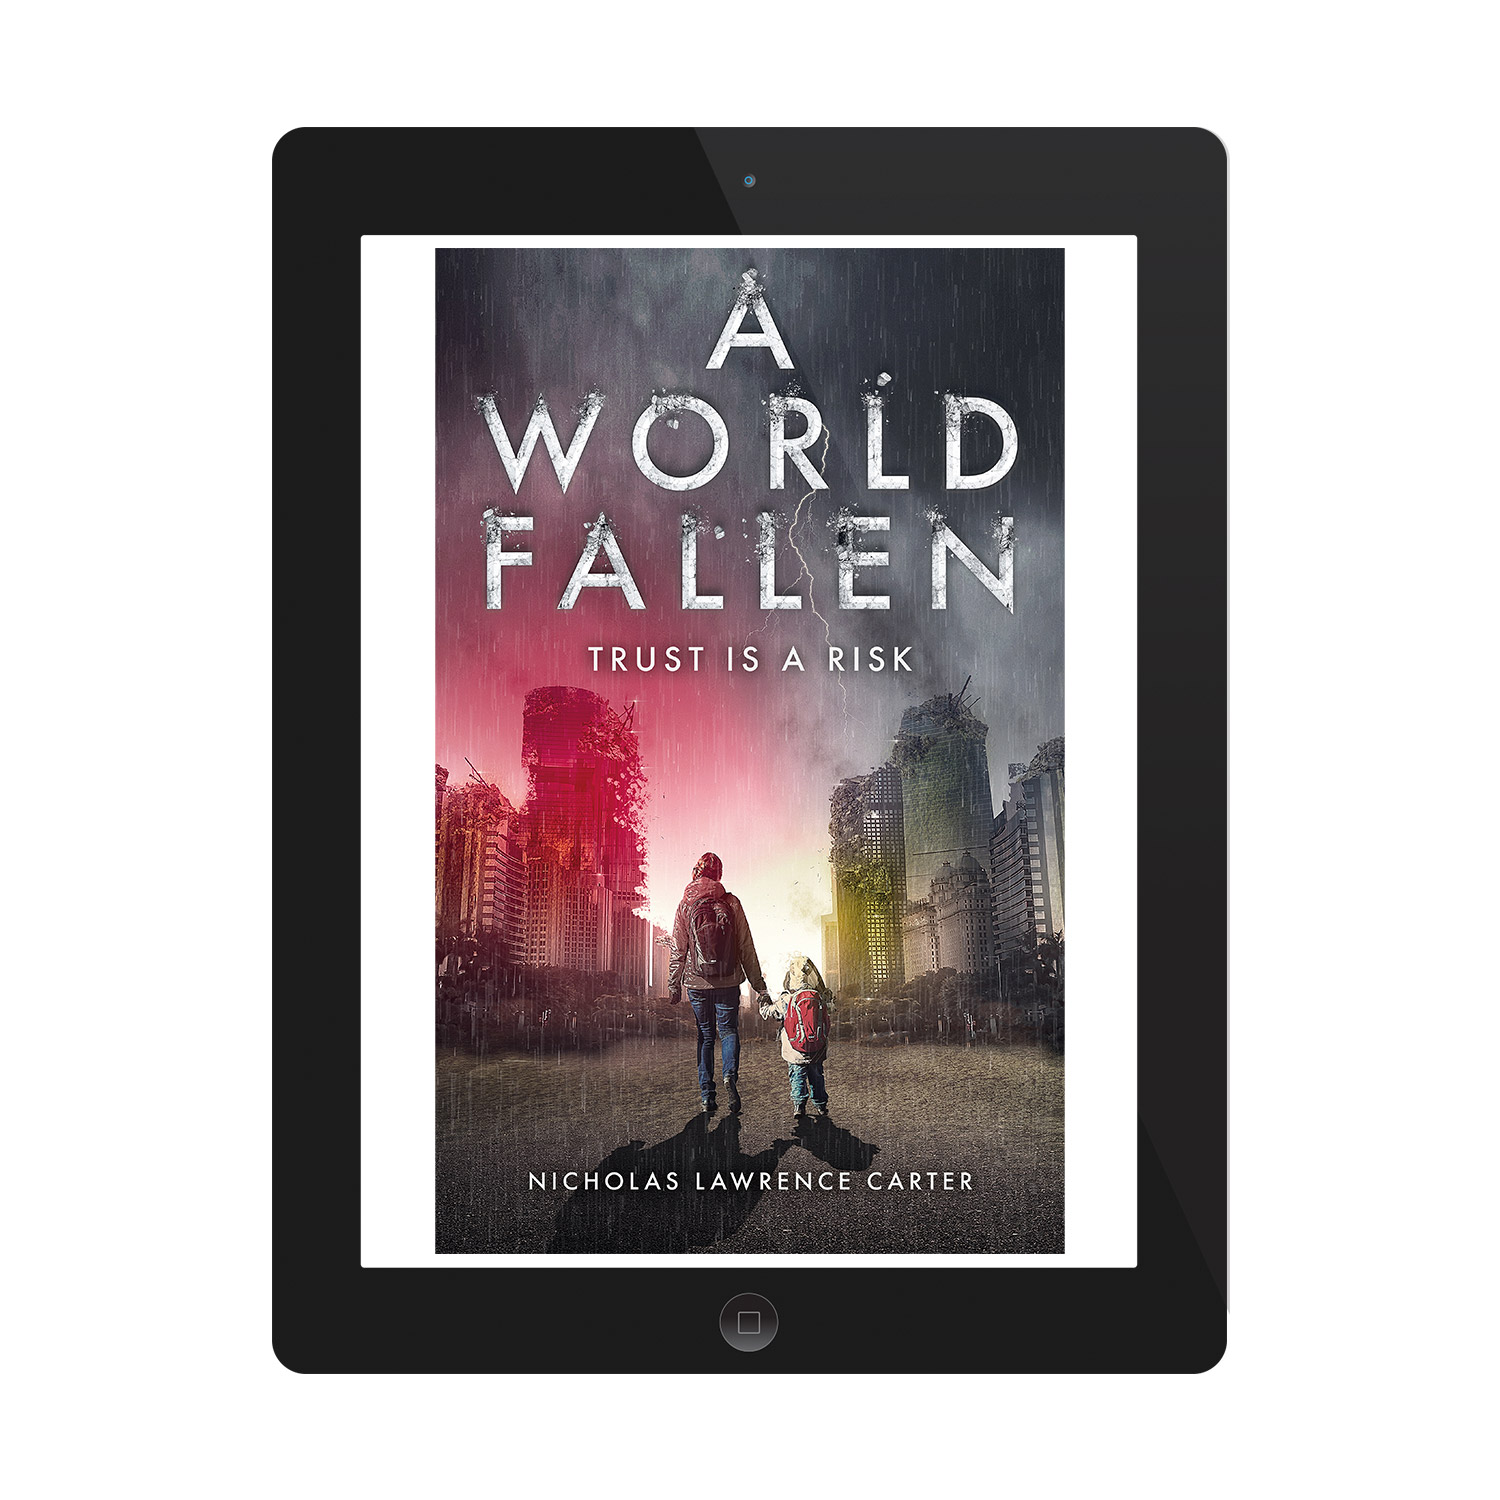 'A World Fallen' is an immersive, post-apocalyse scifi novel. The author is Nicholas Lawrence Carter. The book cover design is by Mark Thomas. To learn more about what Mark could do for your book, please visit coverness.com